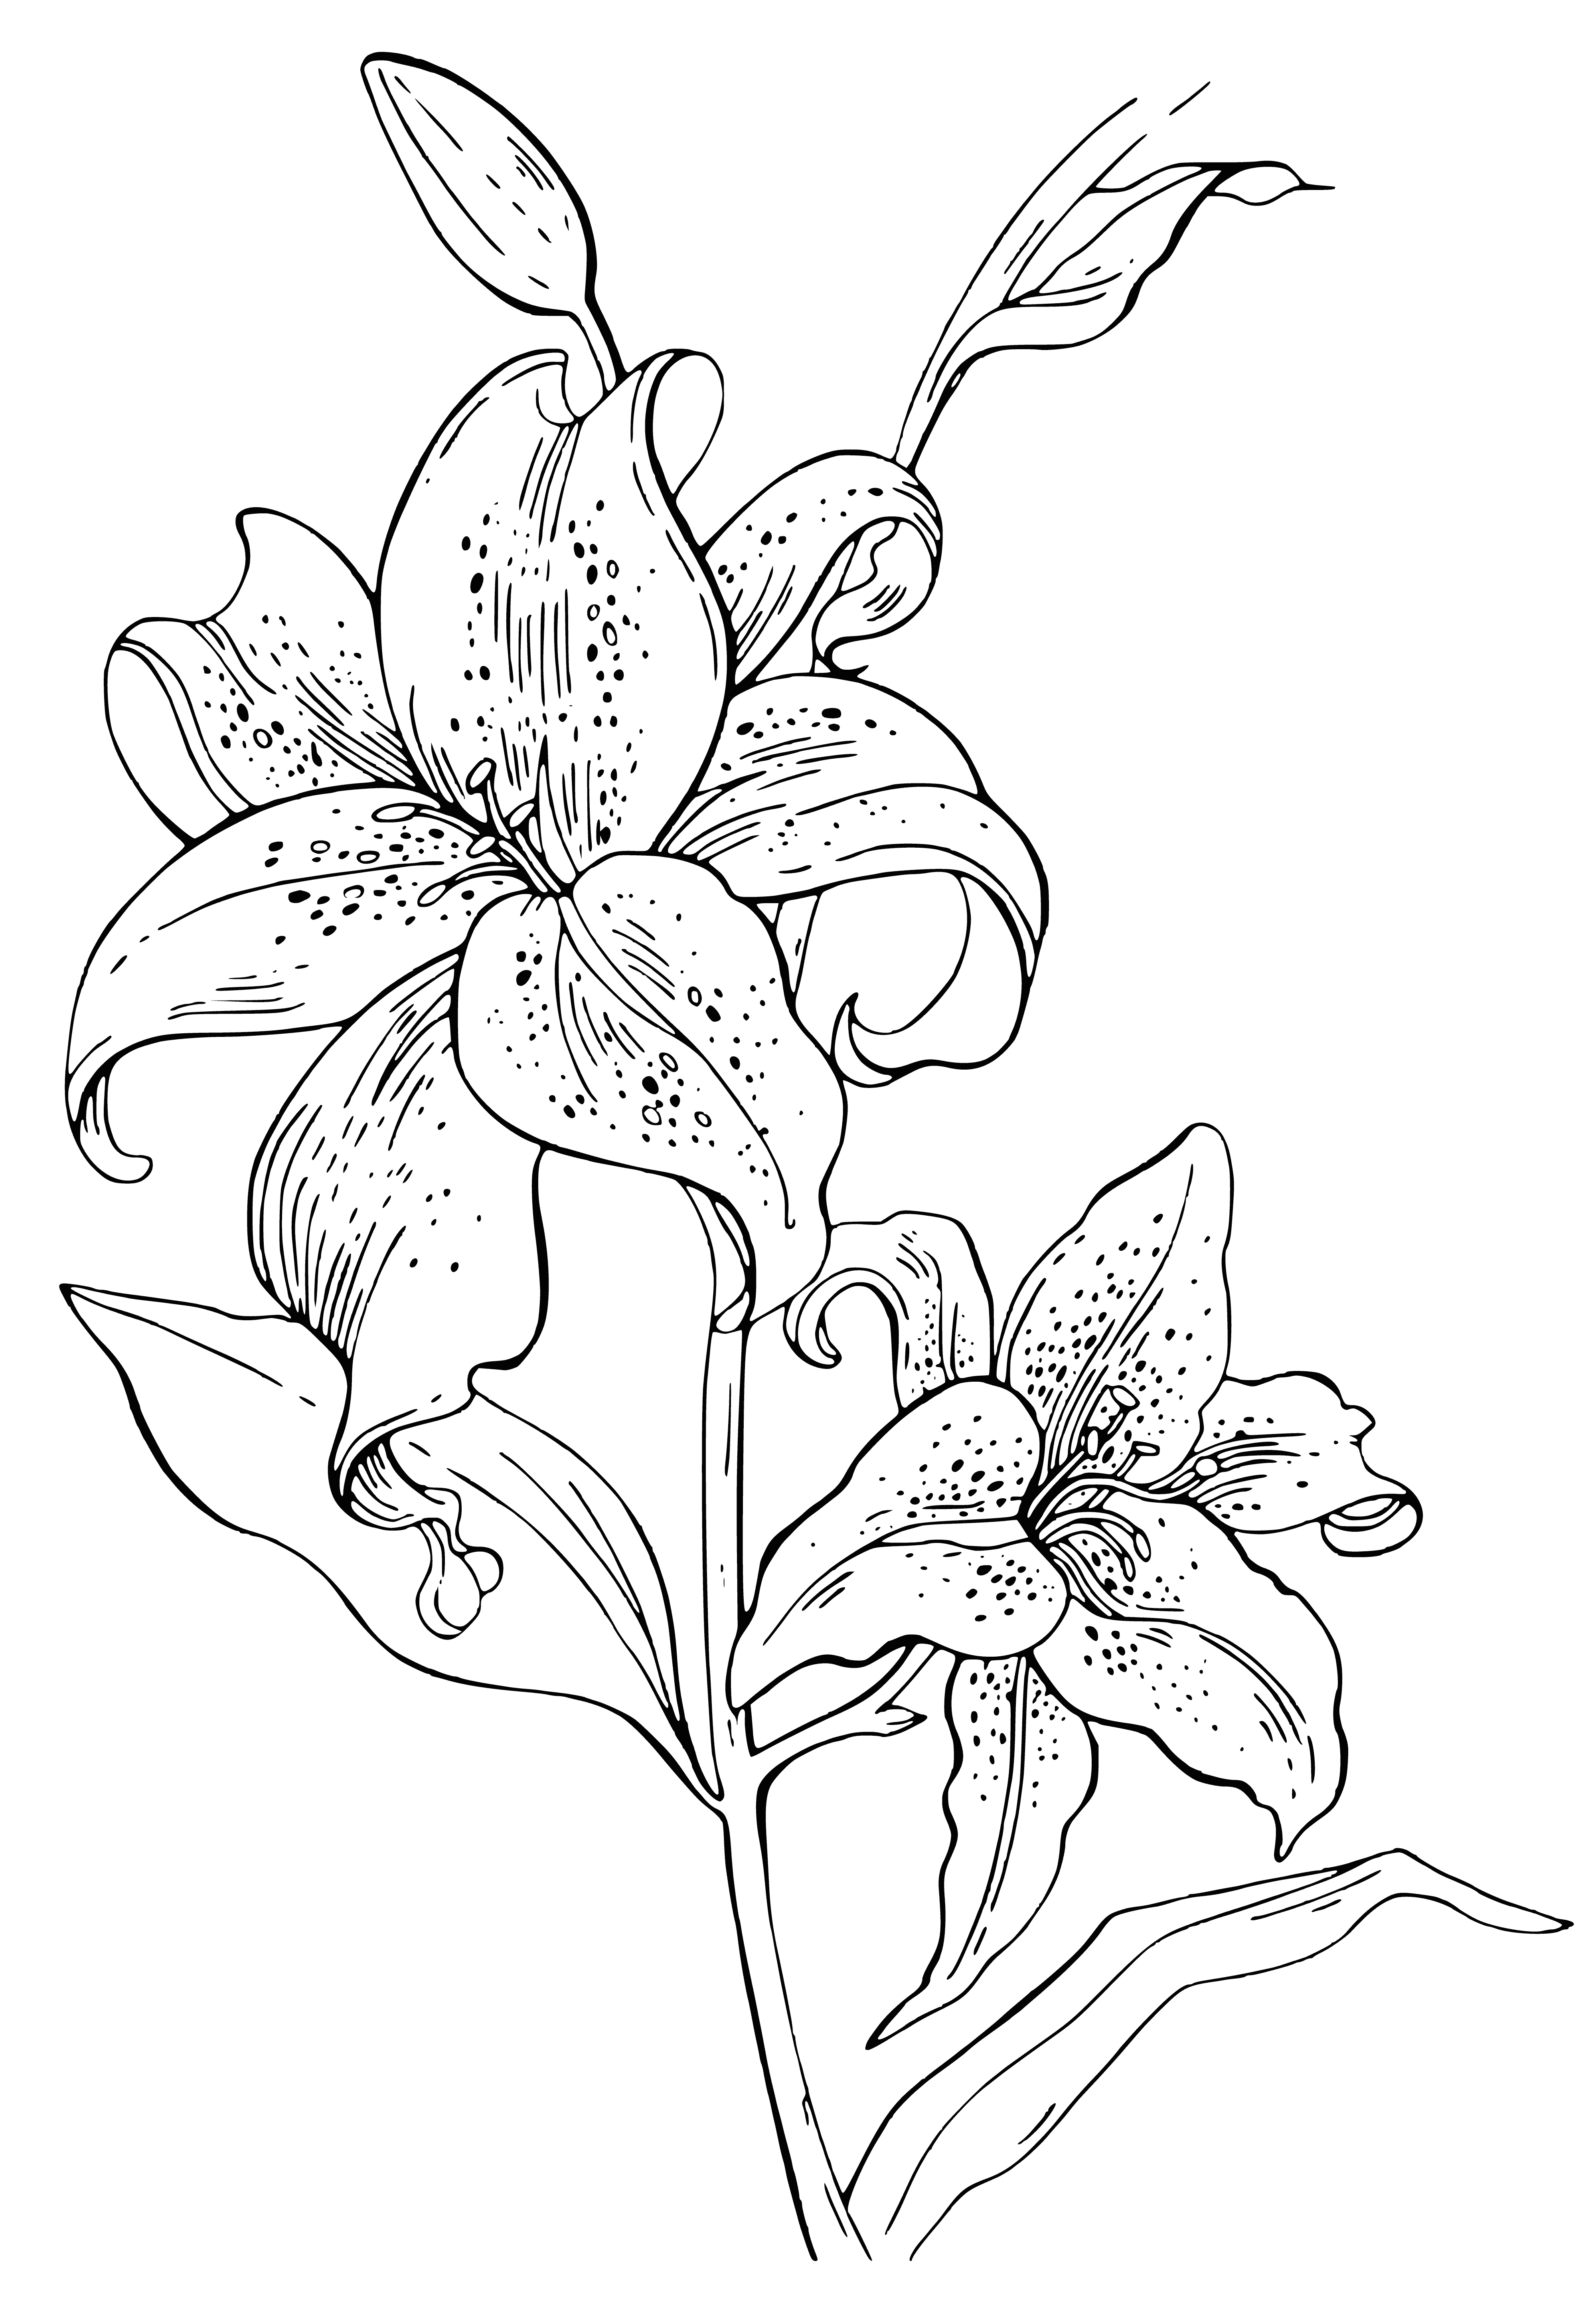 coloring page: White lily in full bloom, long stamen curling in, yellow pistil, 3 small leaves, one unopened bud. Long thin stem.